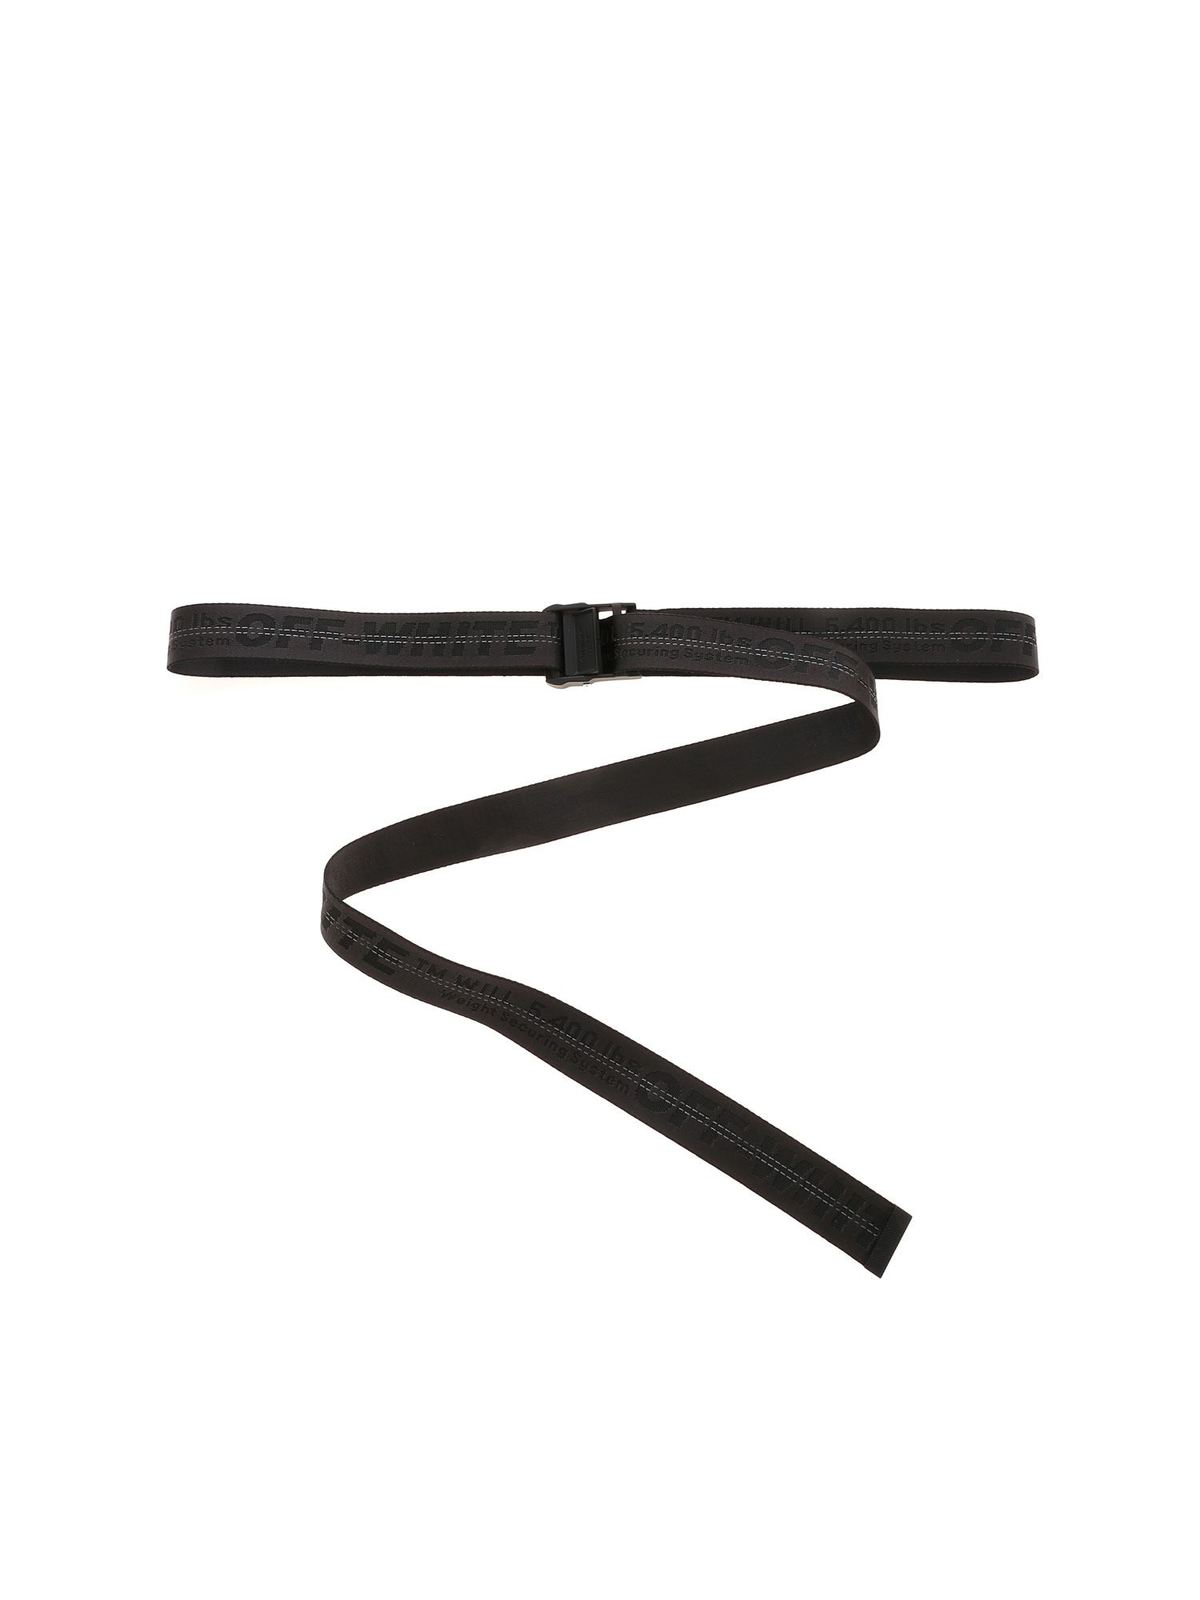 OFF-WHITE CLASSIC INDUSTRIAL BELT IN BLACK